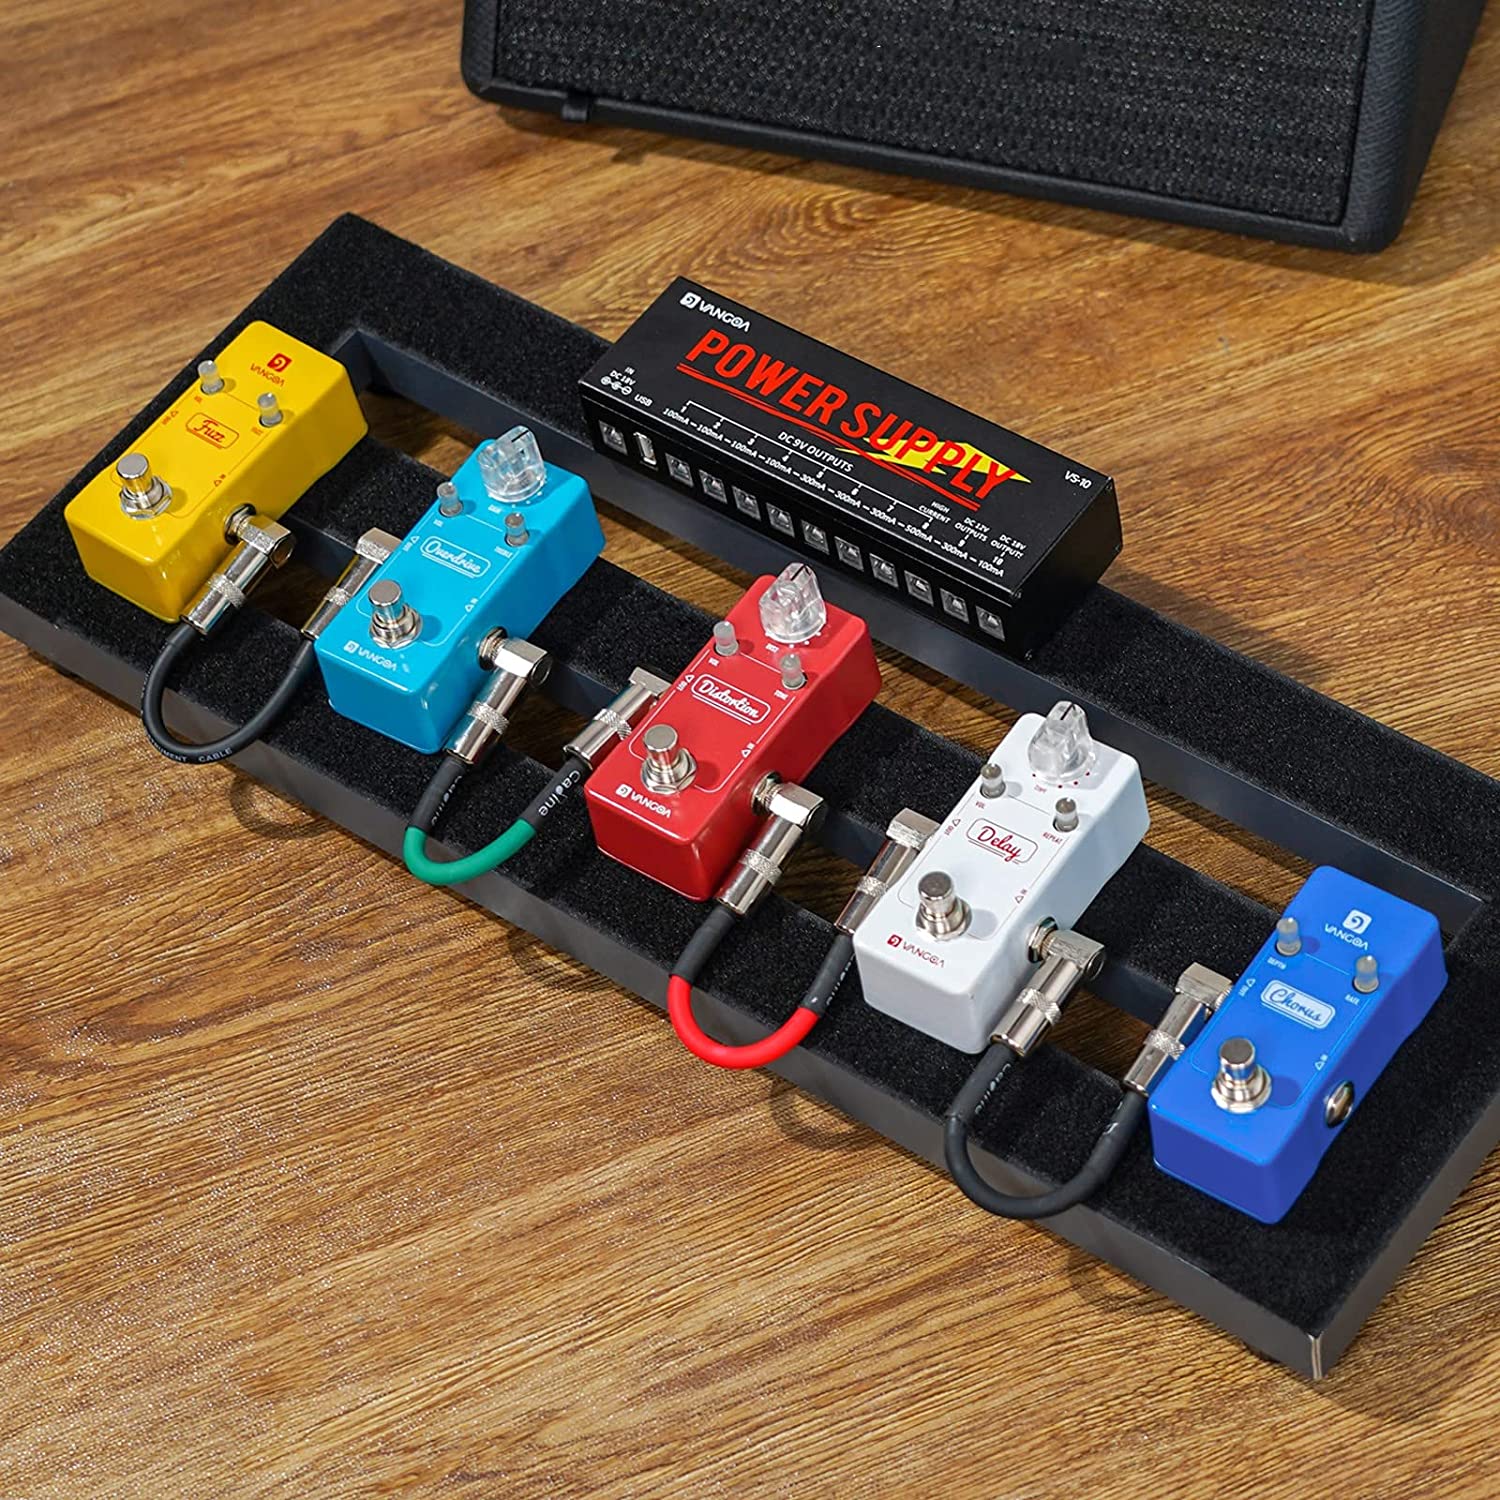 available on ]Vangoa Basic VPB30 Guitar Pedal Board with Carryi